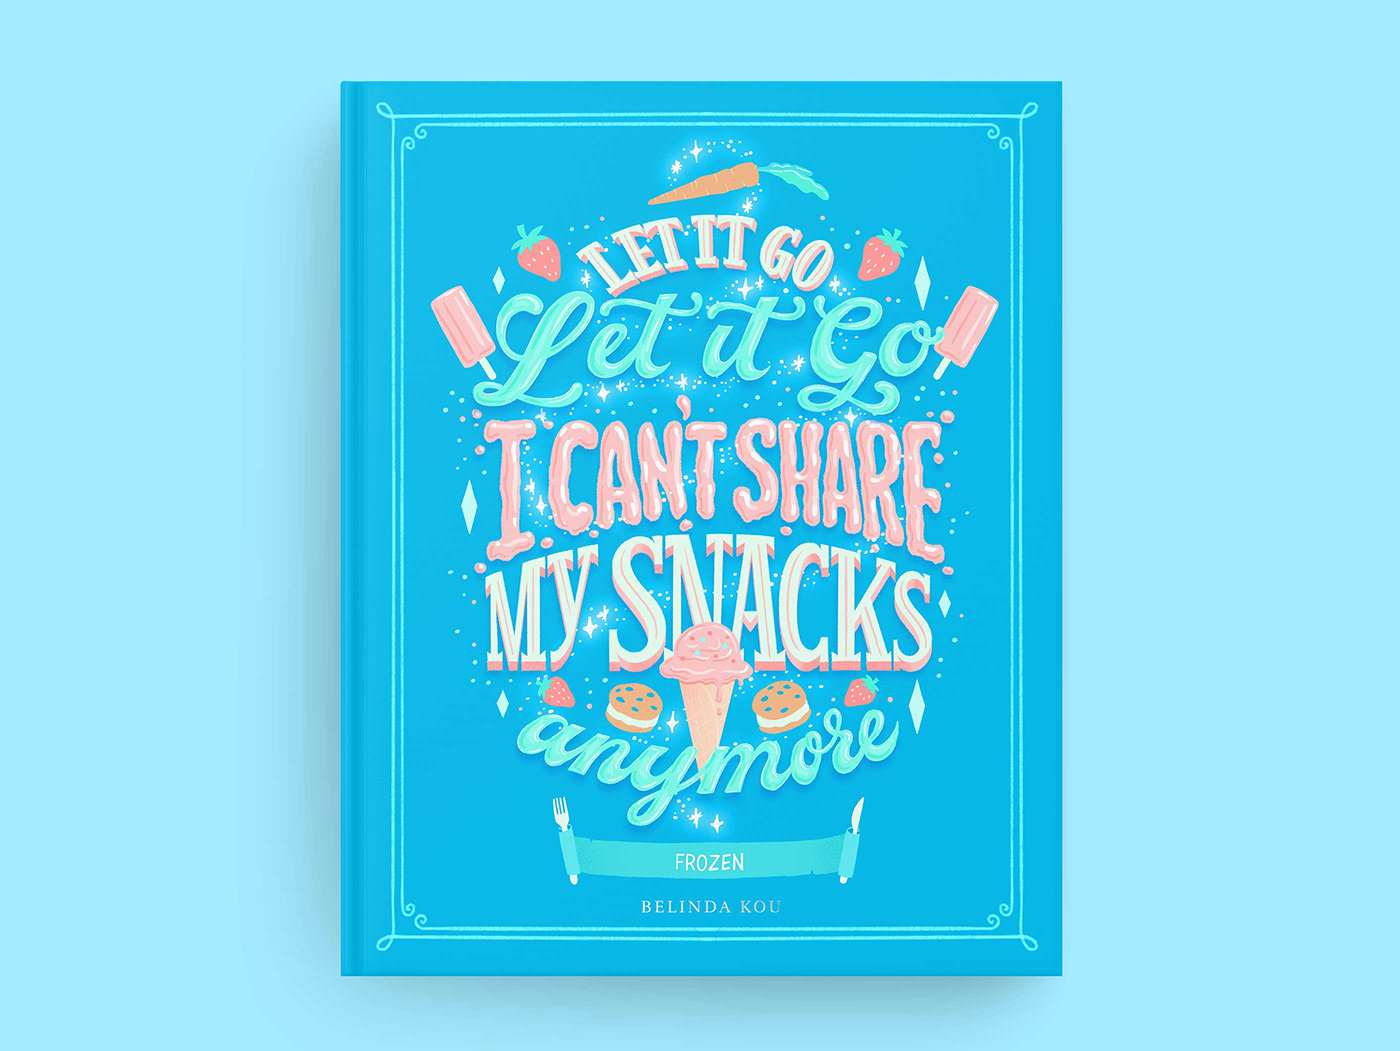 Book cover design with a food spin on Frozen featuring hand lettering on "Let it Go" but with snacks